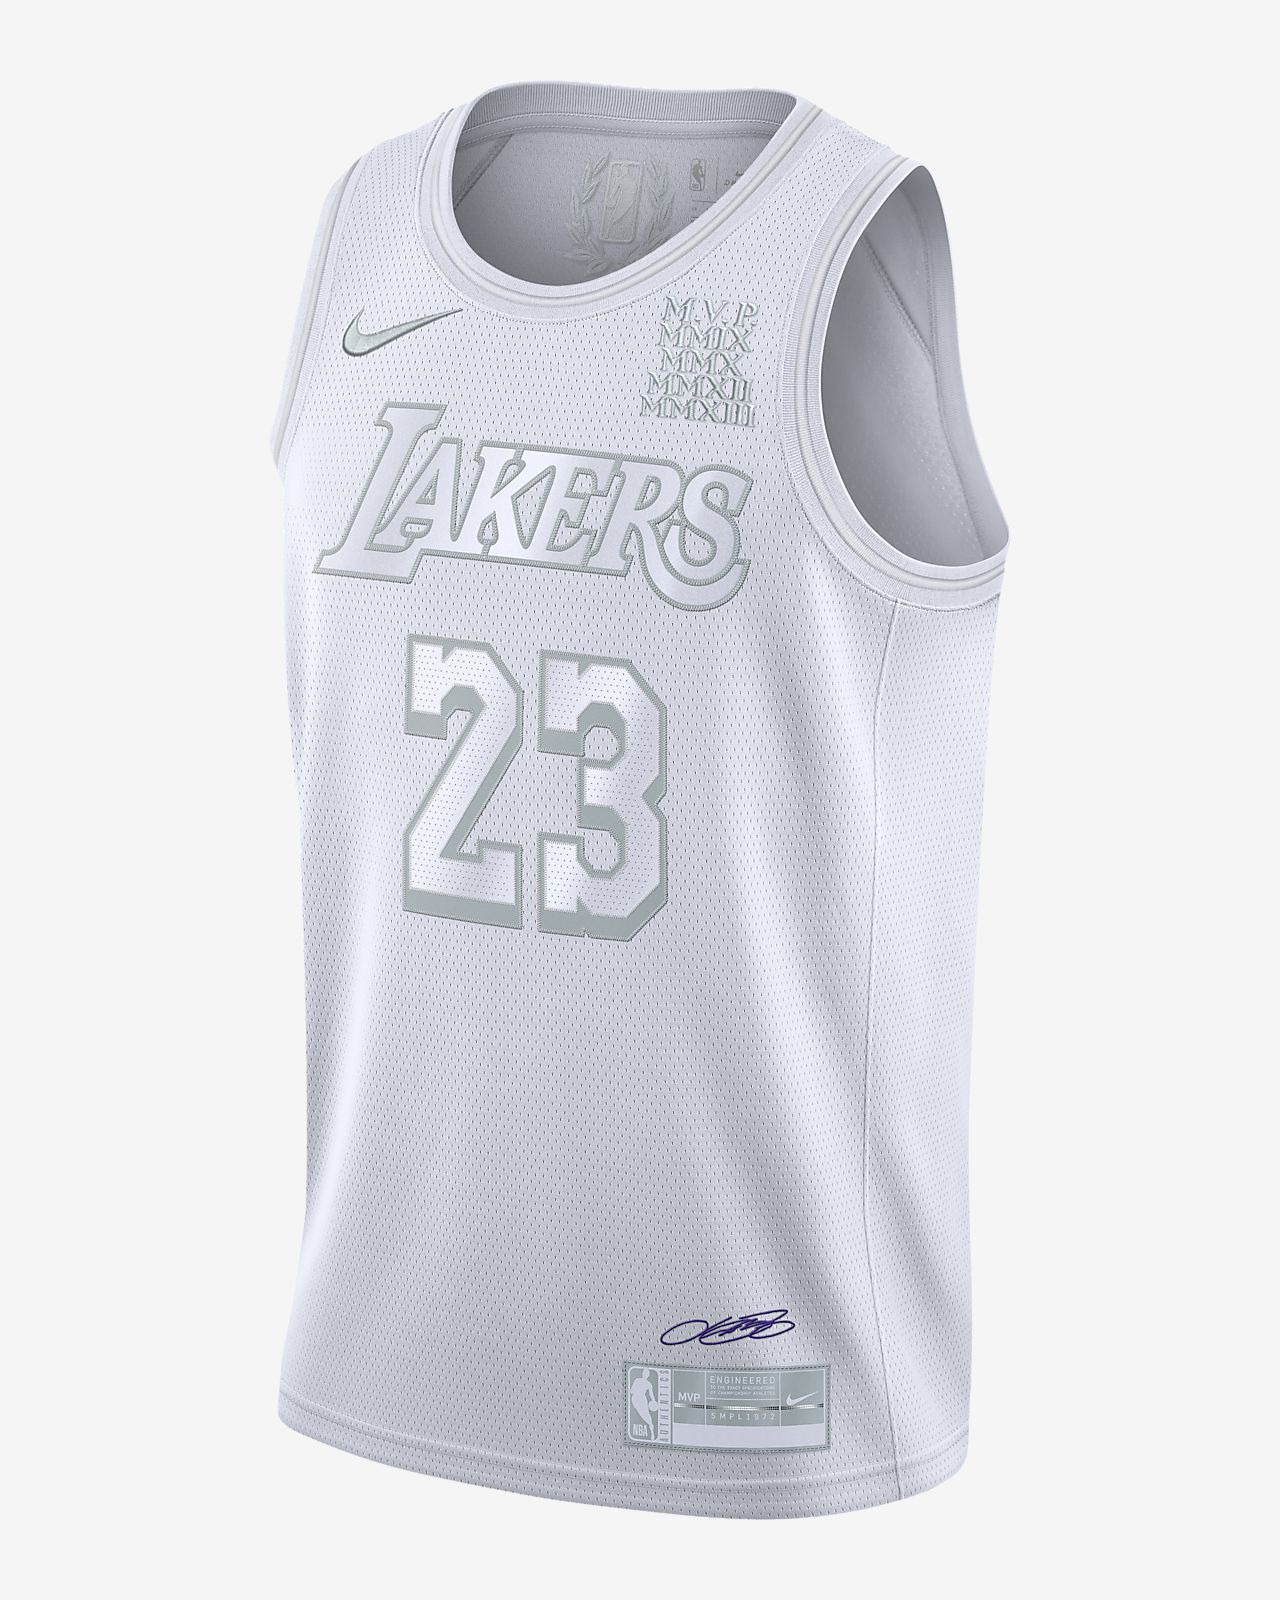 images of lebron james jersey